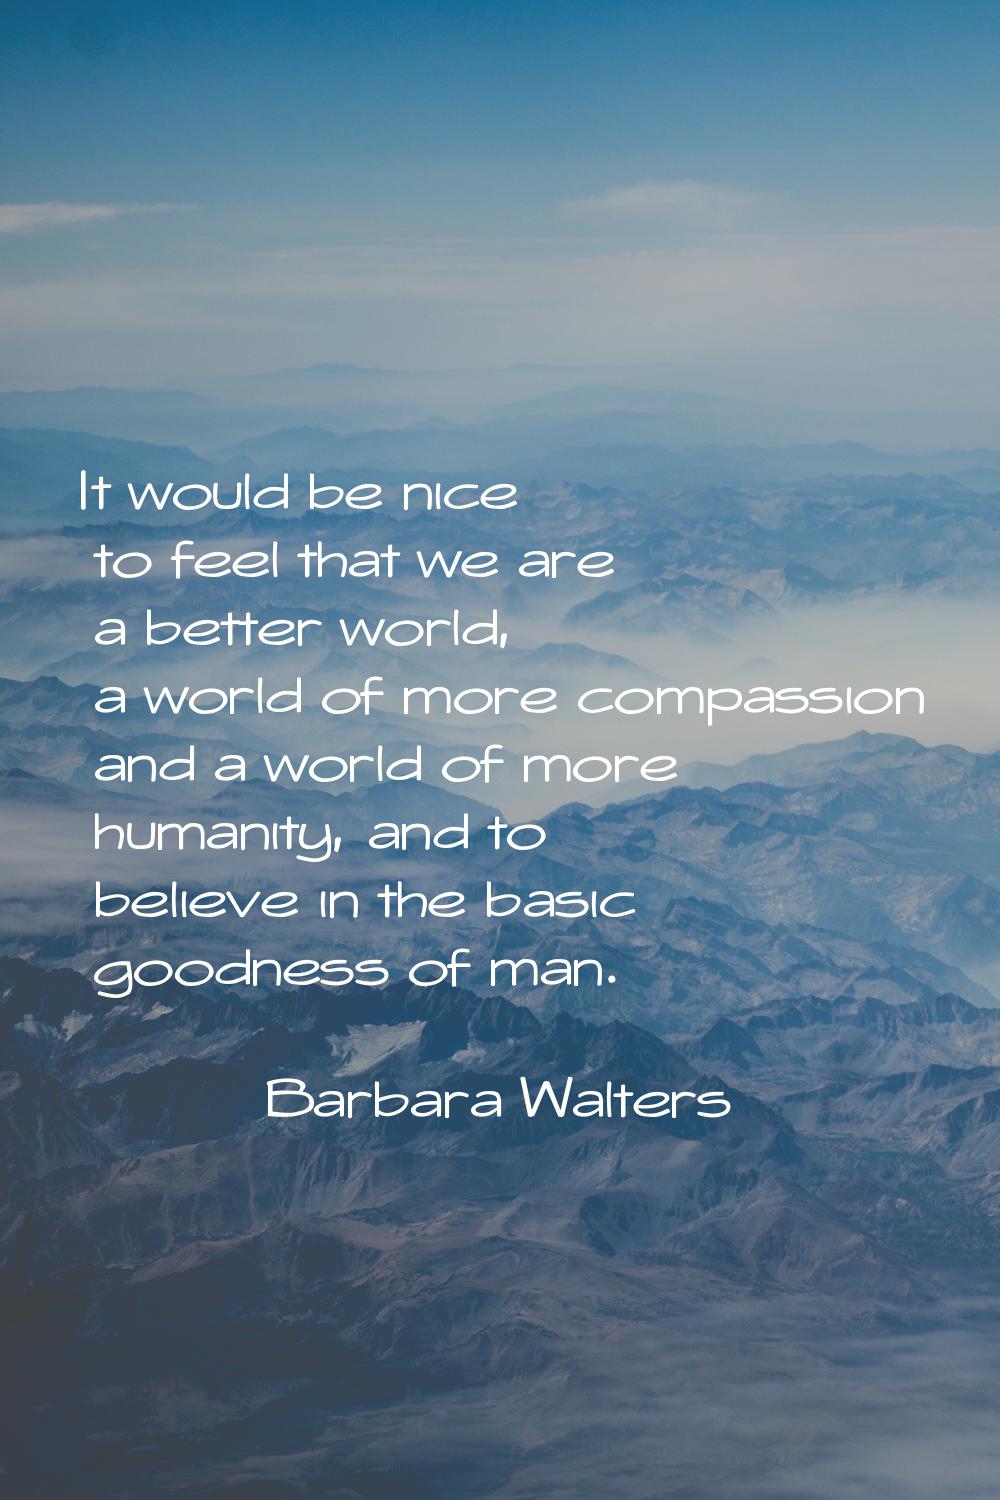 It would be nice to feel that we are a better world, a world of more compassion and a world of more